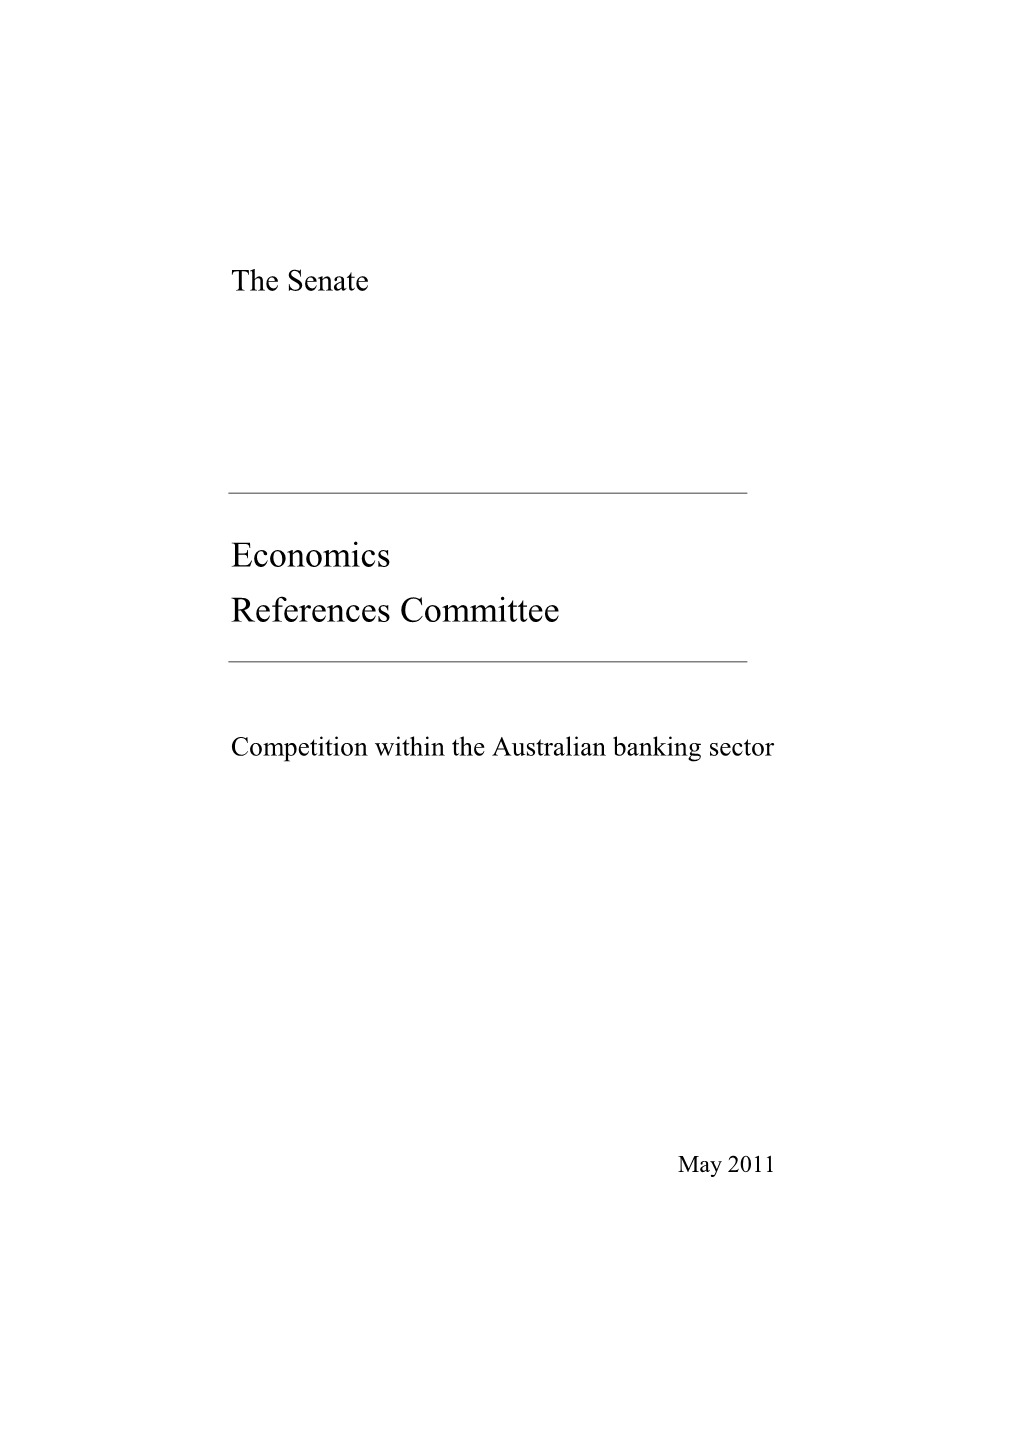 Competition Within the Australian Banking Sector